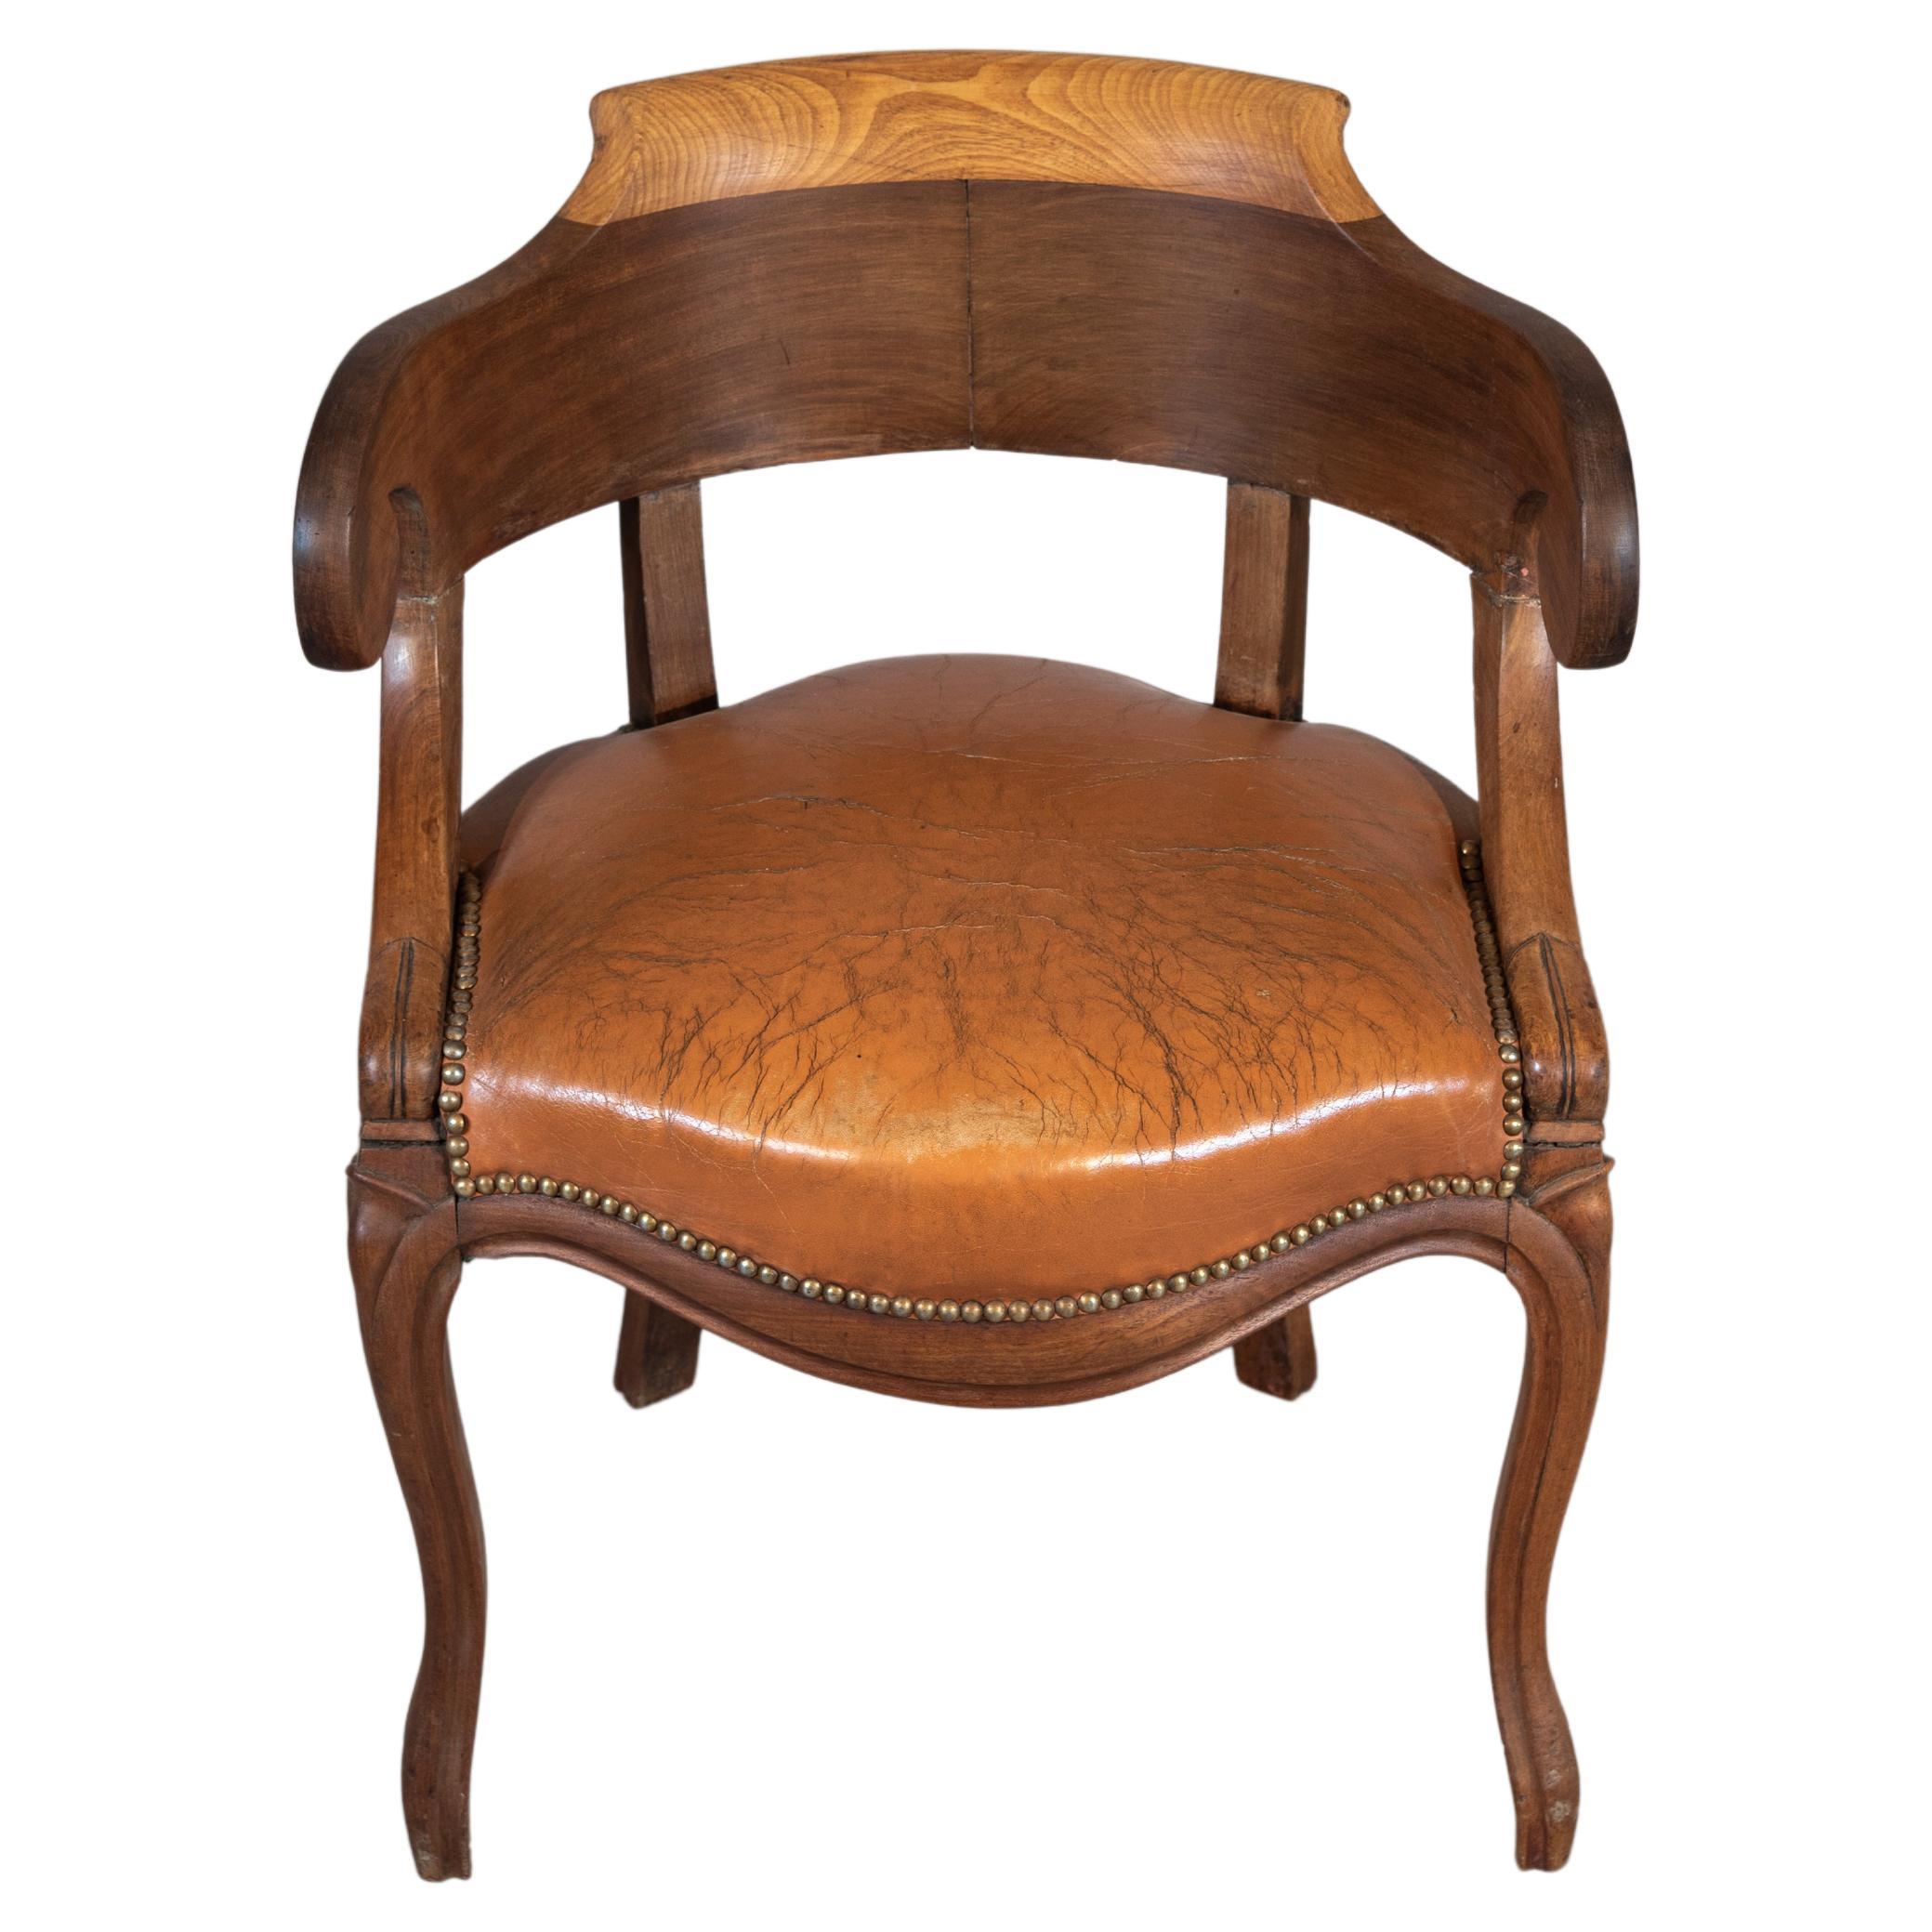 19th Century French Louis Philippe Period Desk Chair